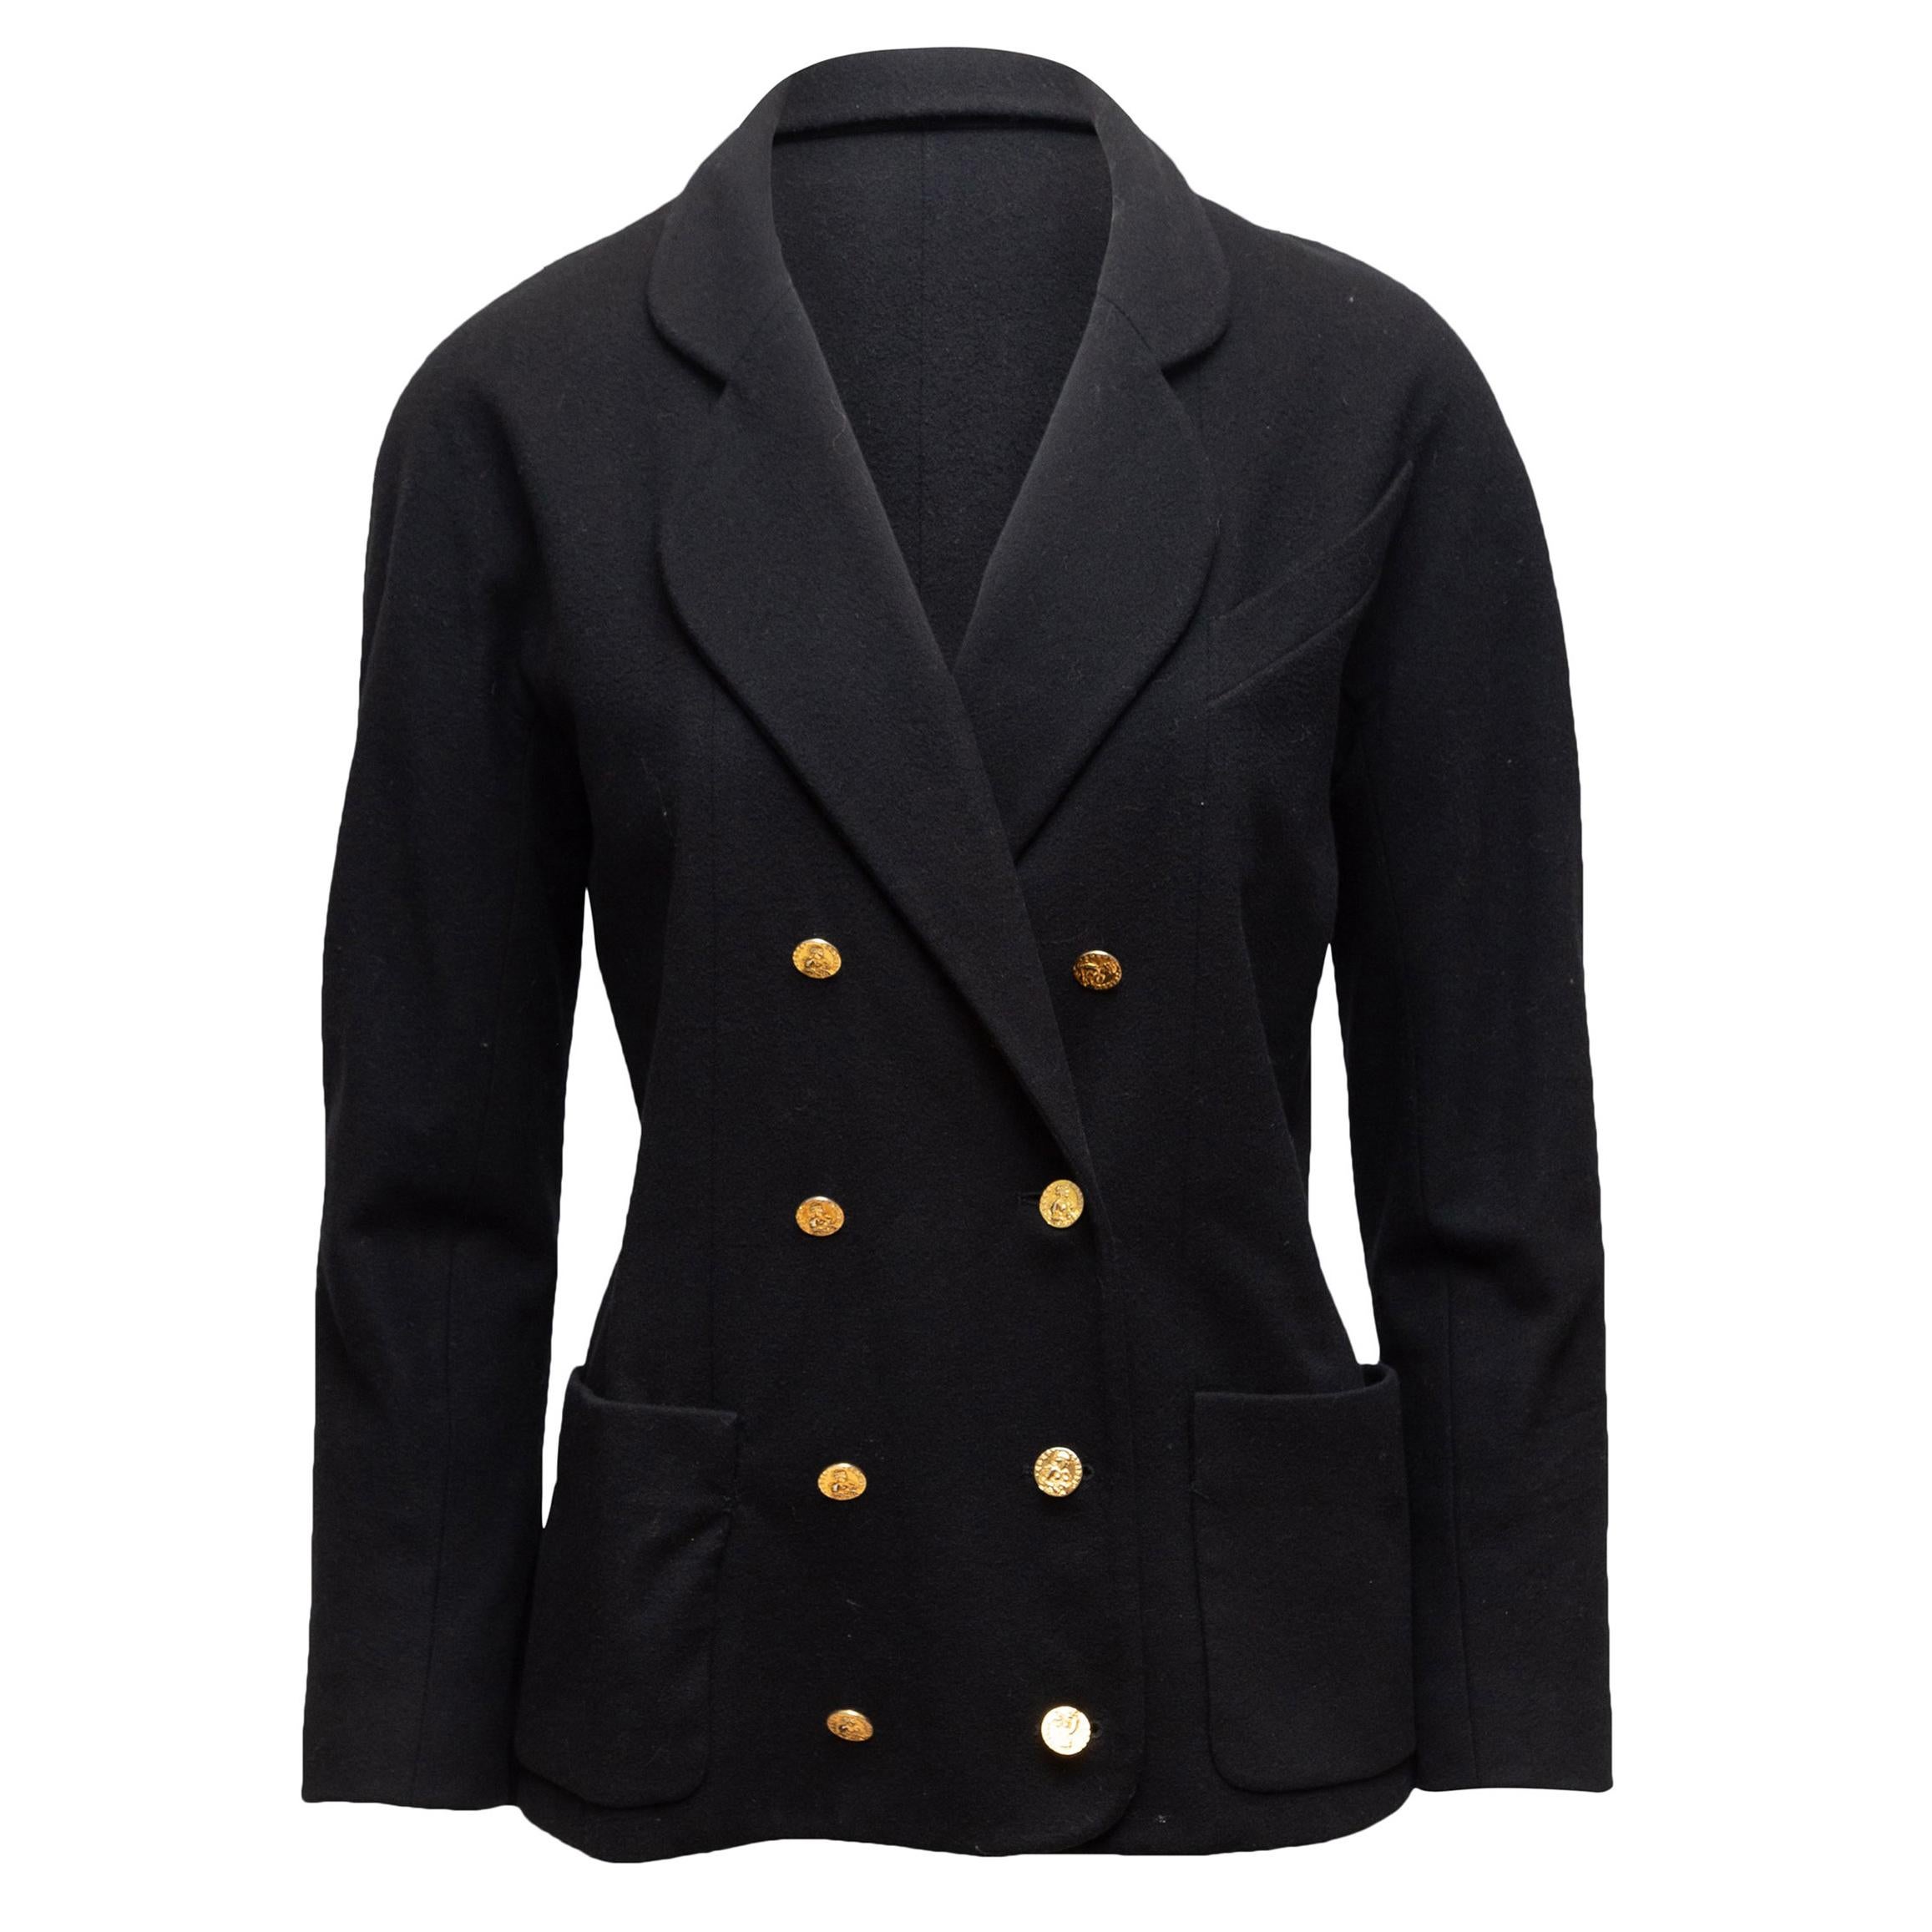 Chanel Boutique Black Double-Breasted Blazer